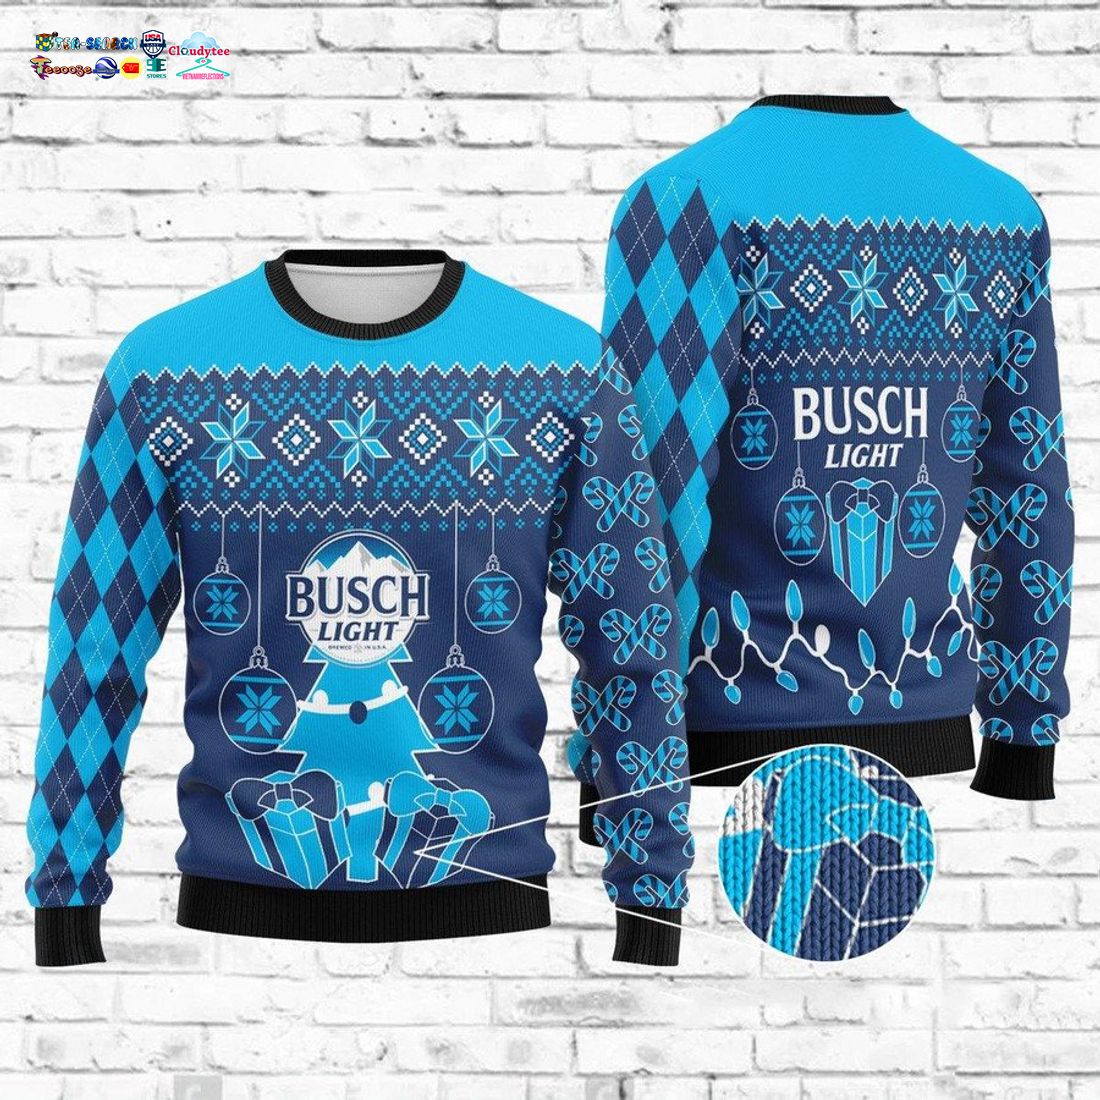 Busch Light Ver 3 Ugly Christmas Sweater - Impressive picture.